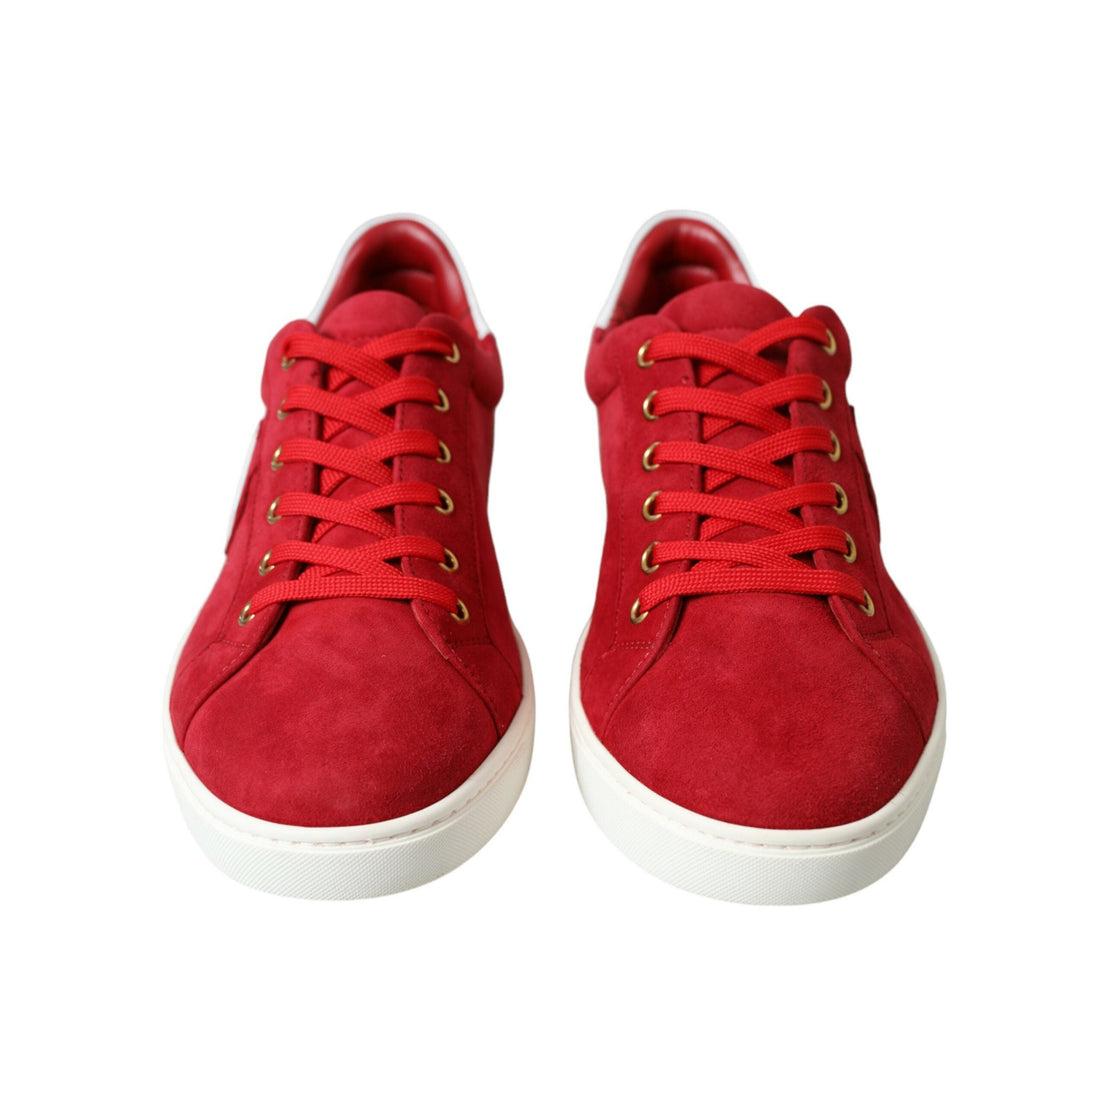 Dolce & Gabbana Red Suede Leather Low Top Sneakers Shoes